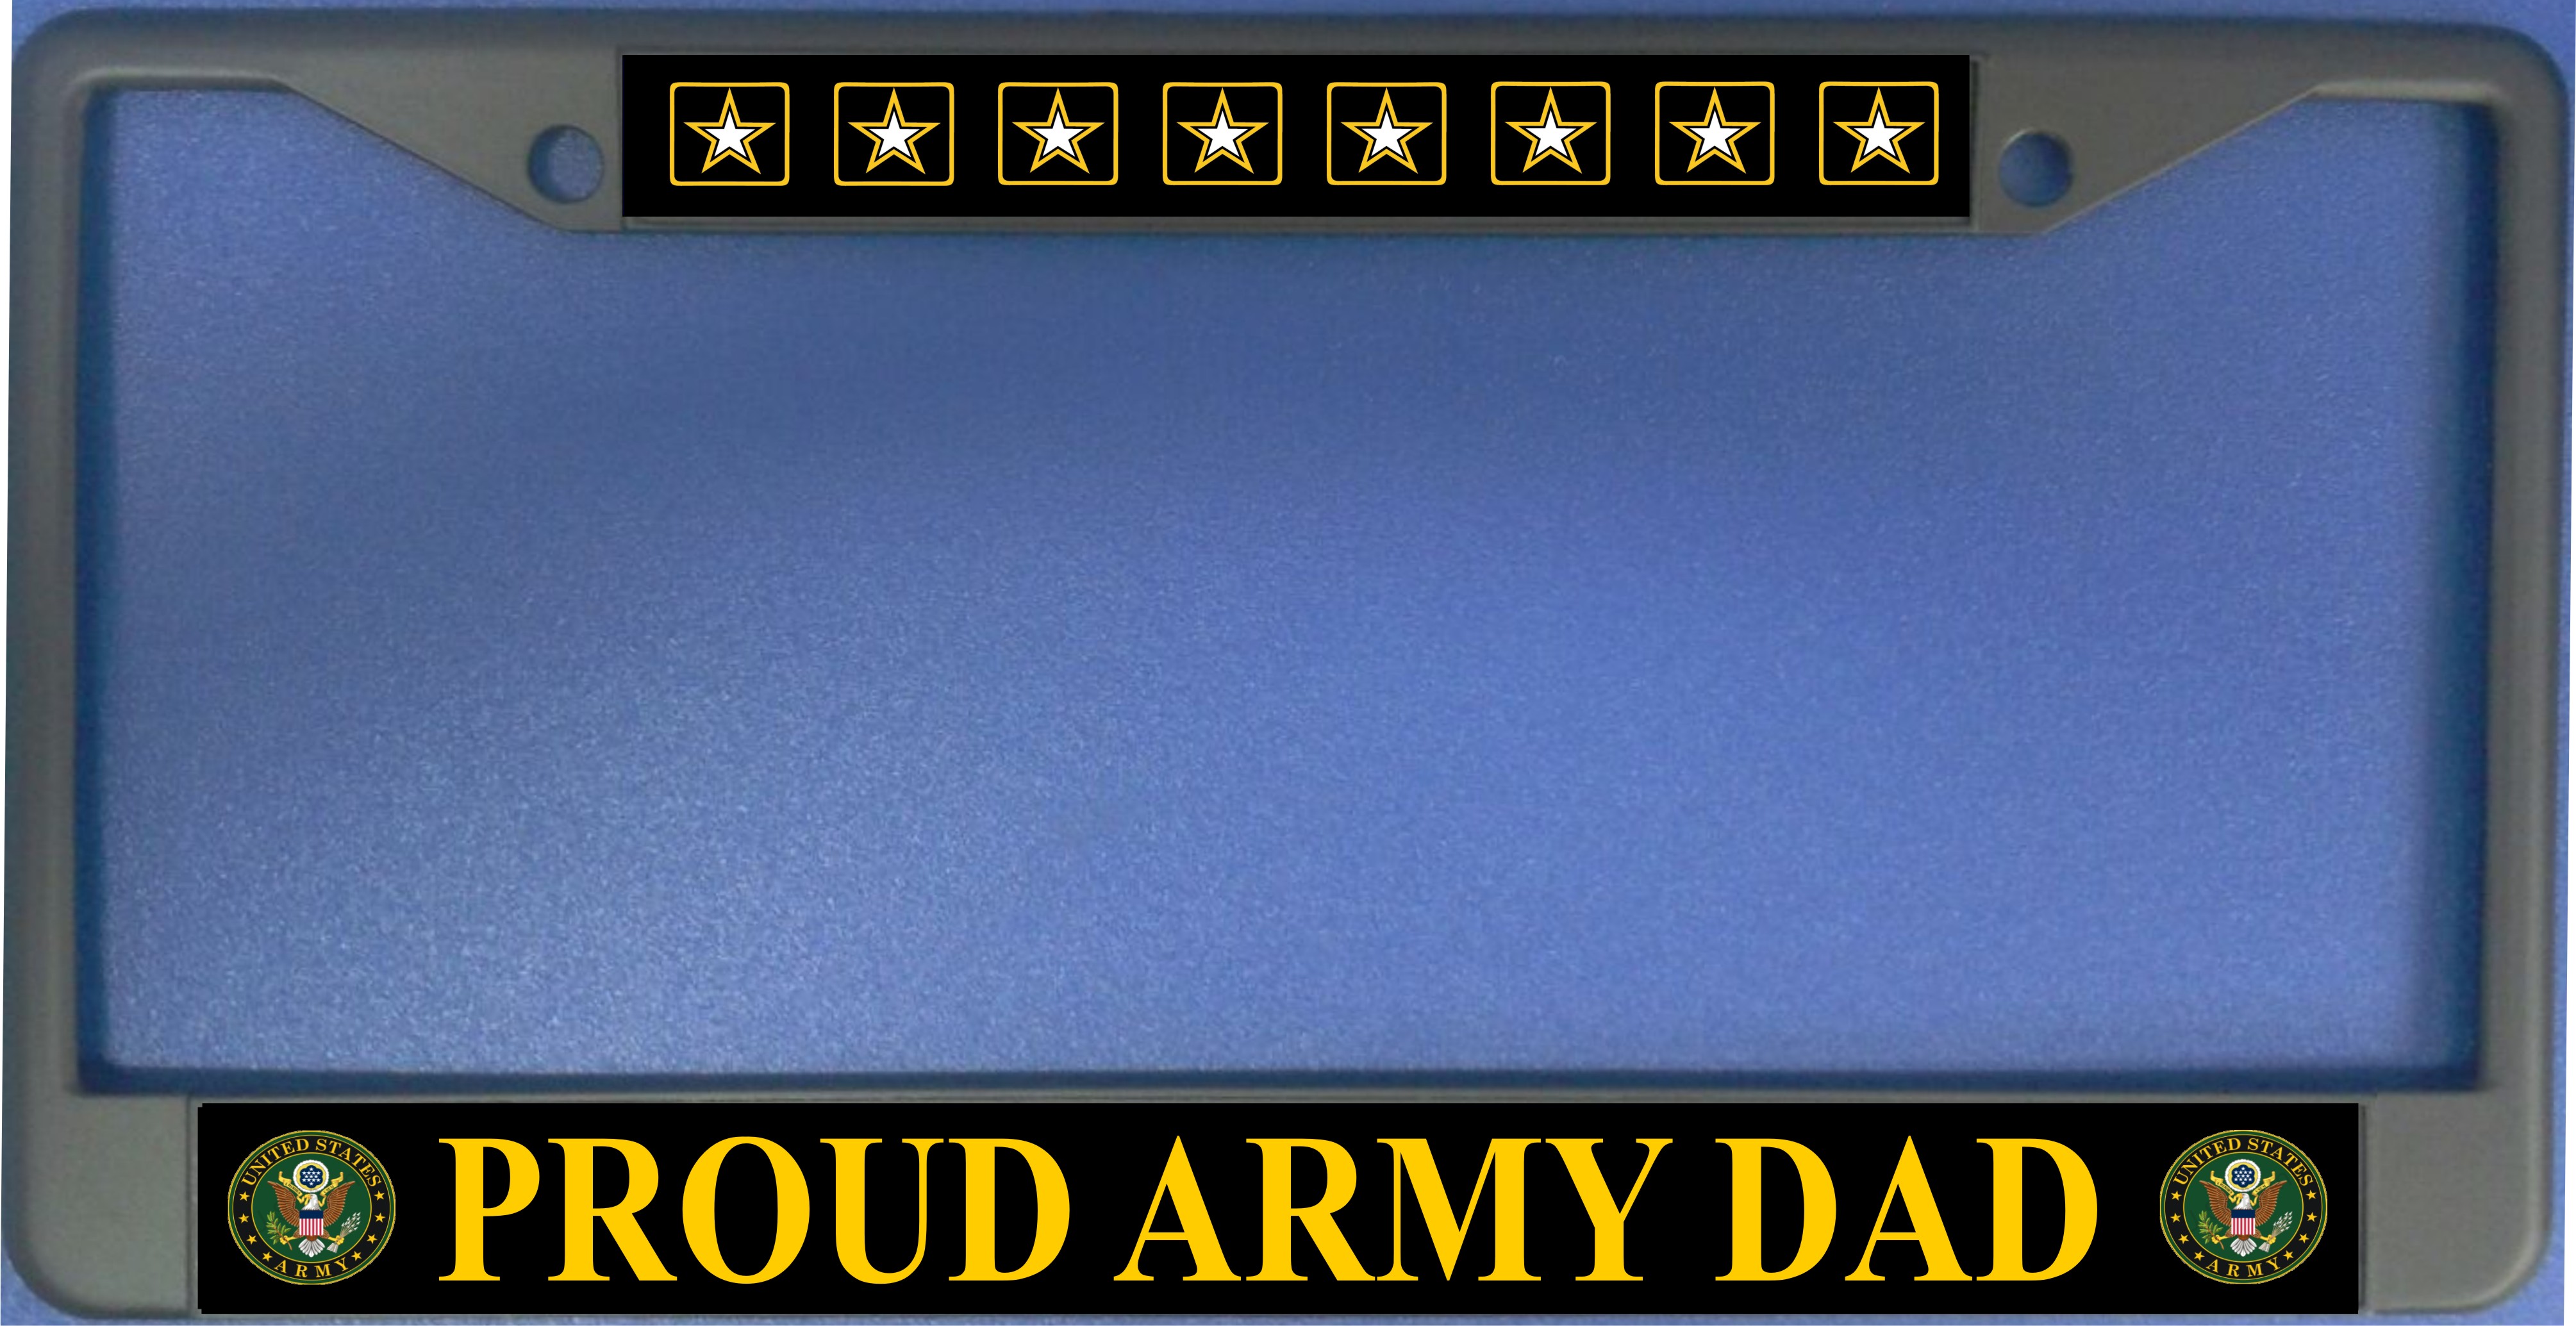 Proud ARMY Dad Photo License Plate Frame  Free Screw CAPs with this Frame